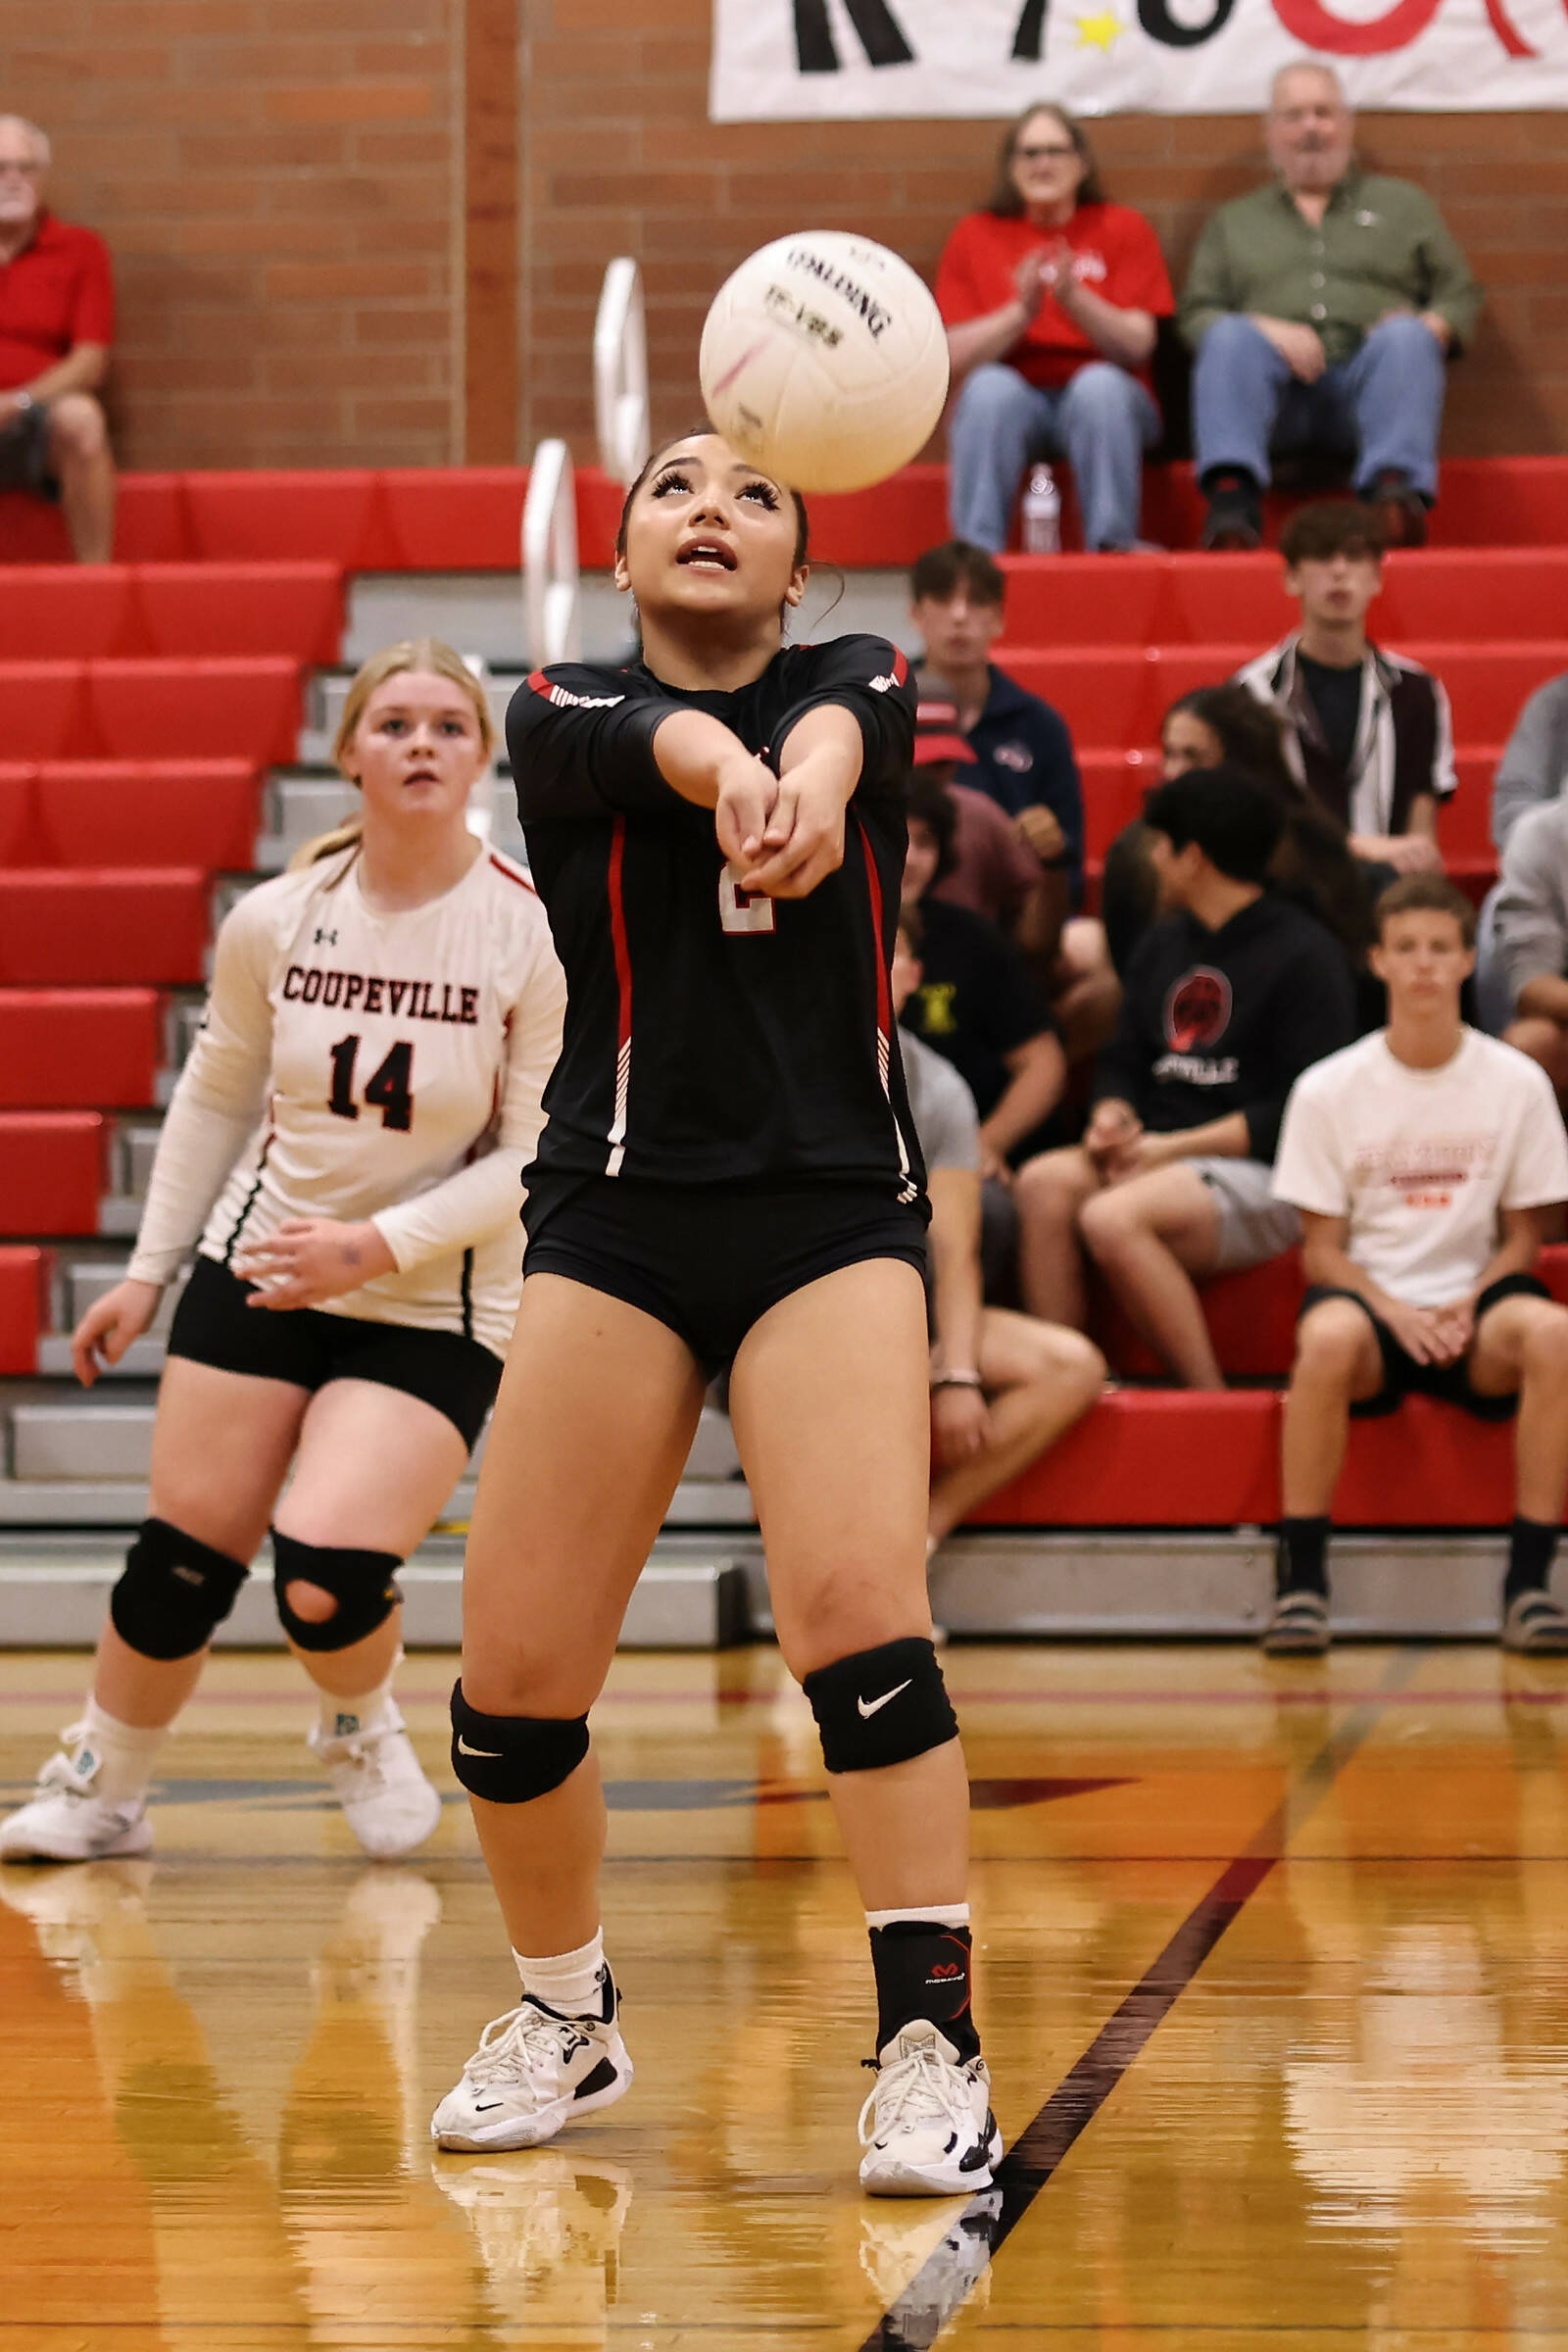 Photo by John Fisken
Coupeville athlete Alita Blouin competes in the Oct. 15 match against Neah Bay. Coupeville defeated Neah Bay 3-1. Coupeville High School’s varsity volleyball team is 8-3 overall this season.